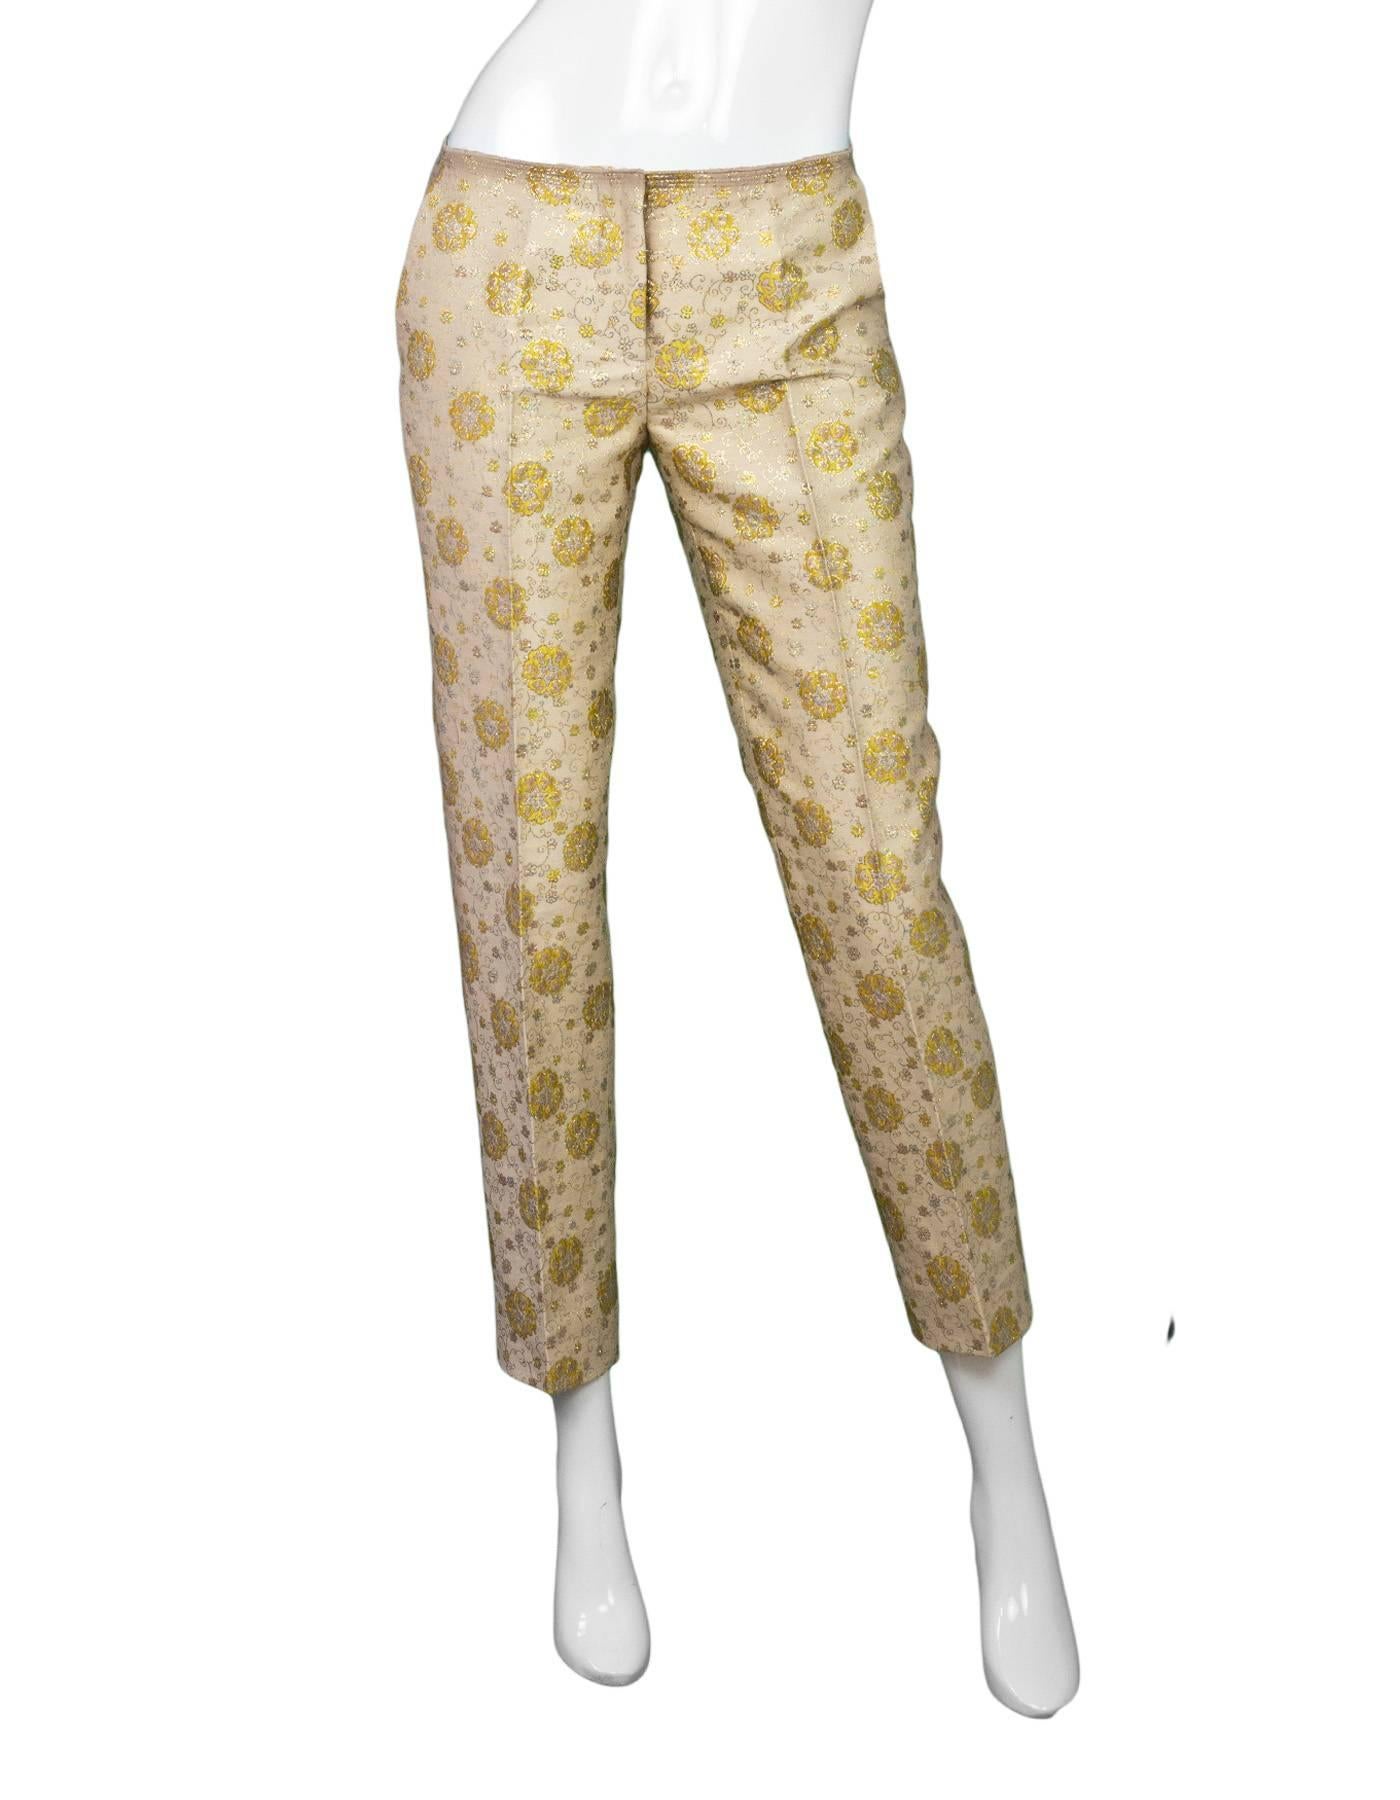 Prada Champagne & Gold Brocade Pants

Made In: Italy
Color: Champagne, gold, pink, and yellow
Composition: 31% cotton, 24% acrylic, 17% silk, 15% acetate, 7% metal fibers, 6% nylon
Lining: Champagne, silk-blend
Closure/Opening: Front zip and